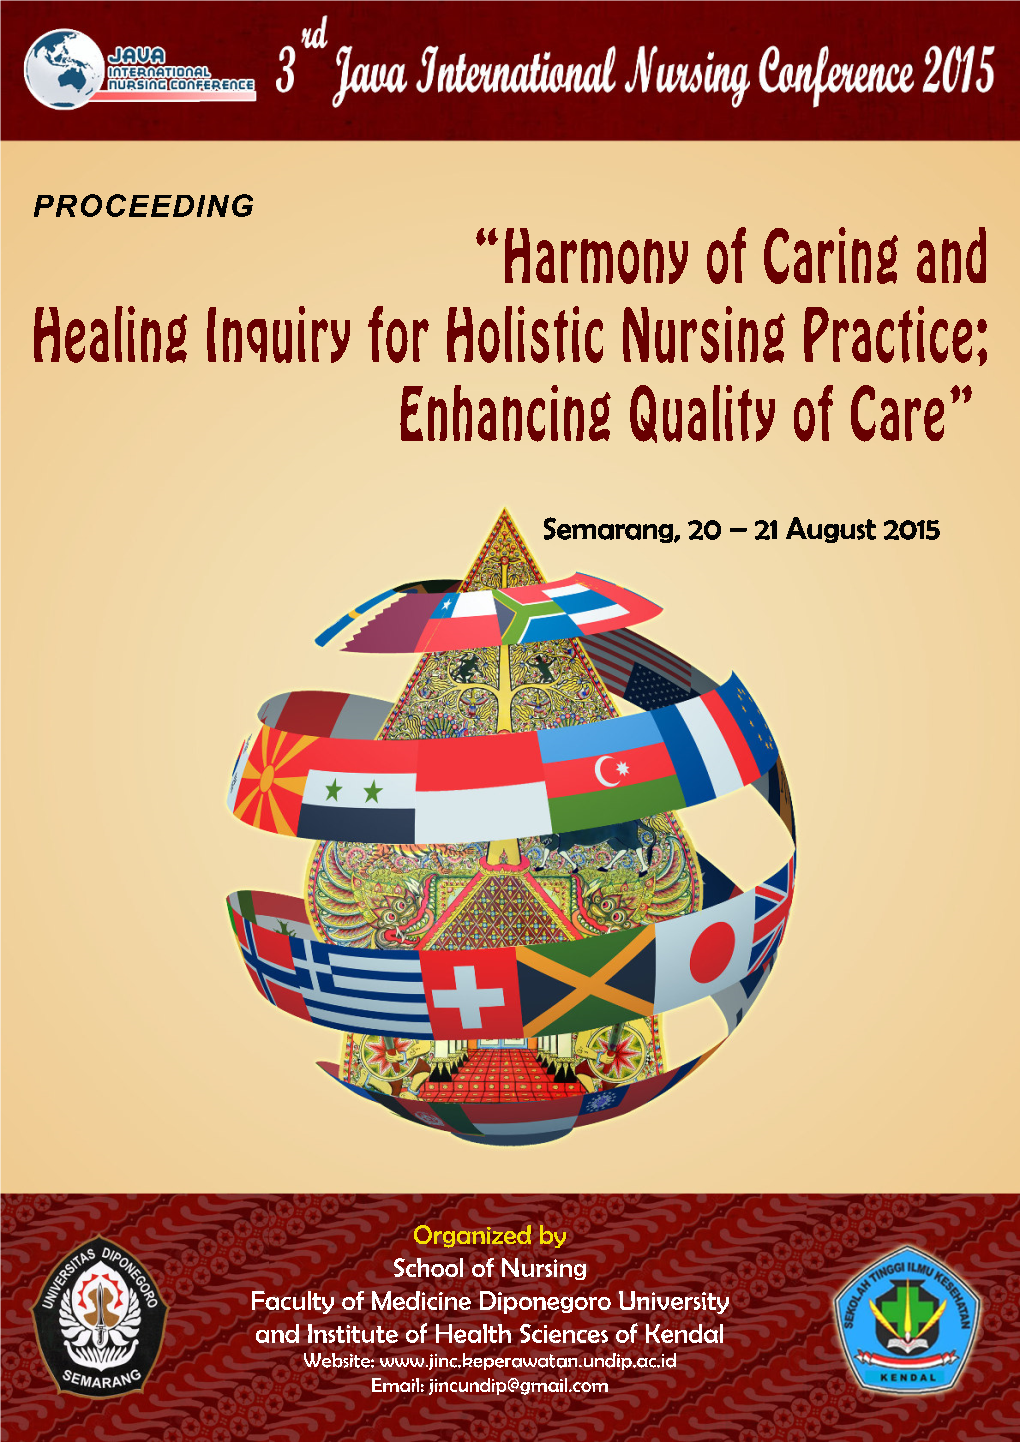 Harmony of Caring and Healing Inquiry for Holistic Nursing Practice; Enhancing Quality of Care”